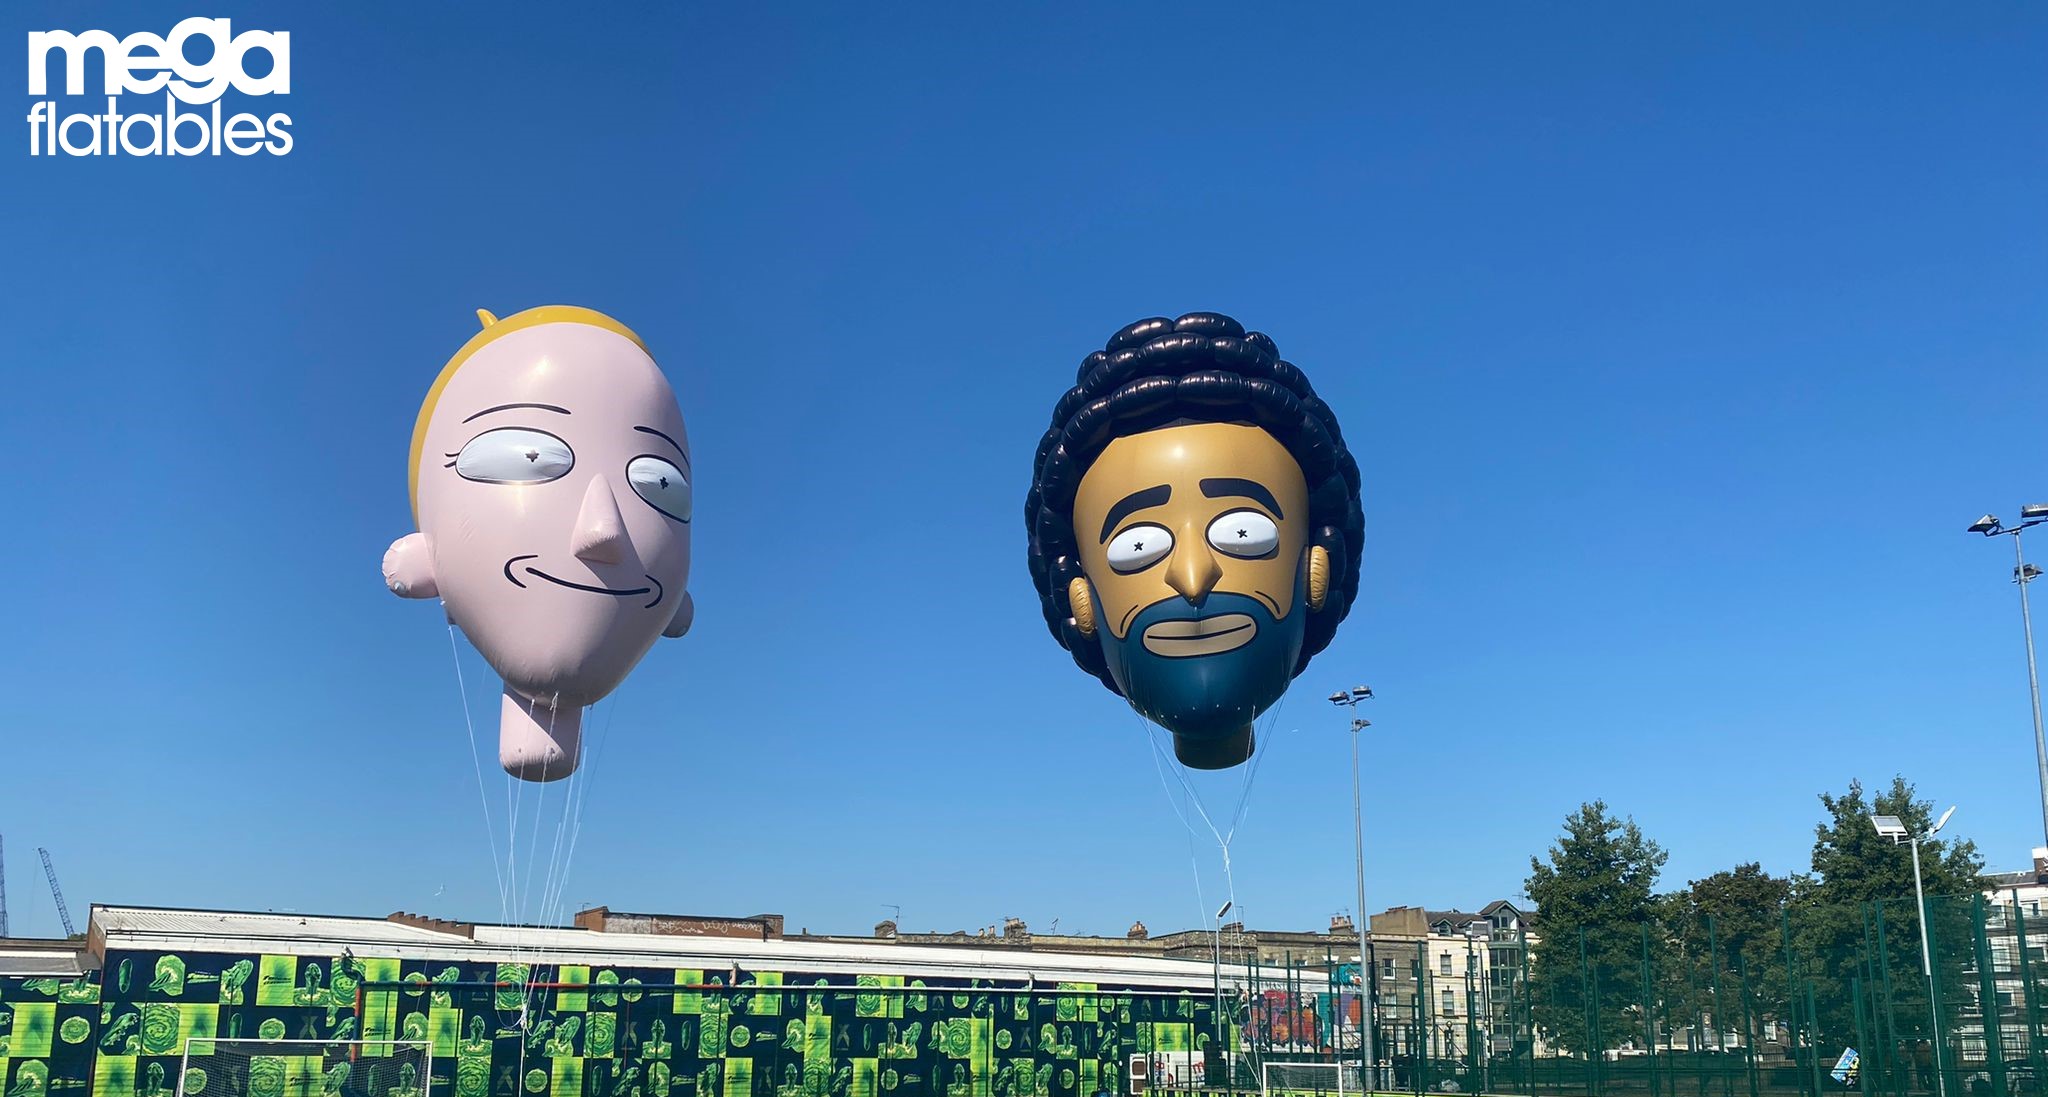 giant inflatable footballer heads